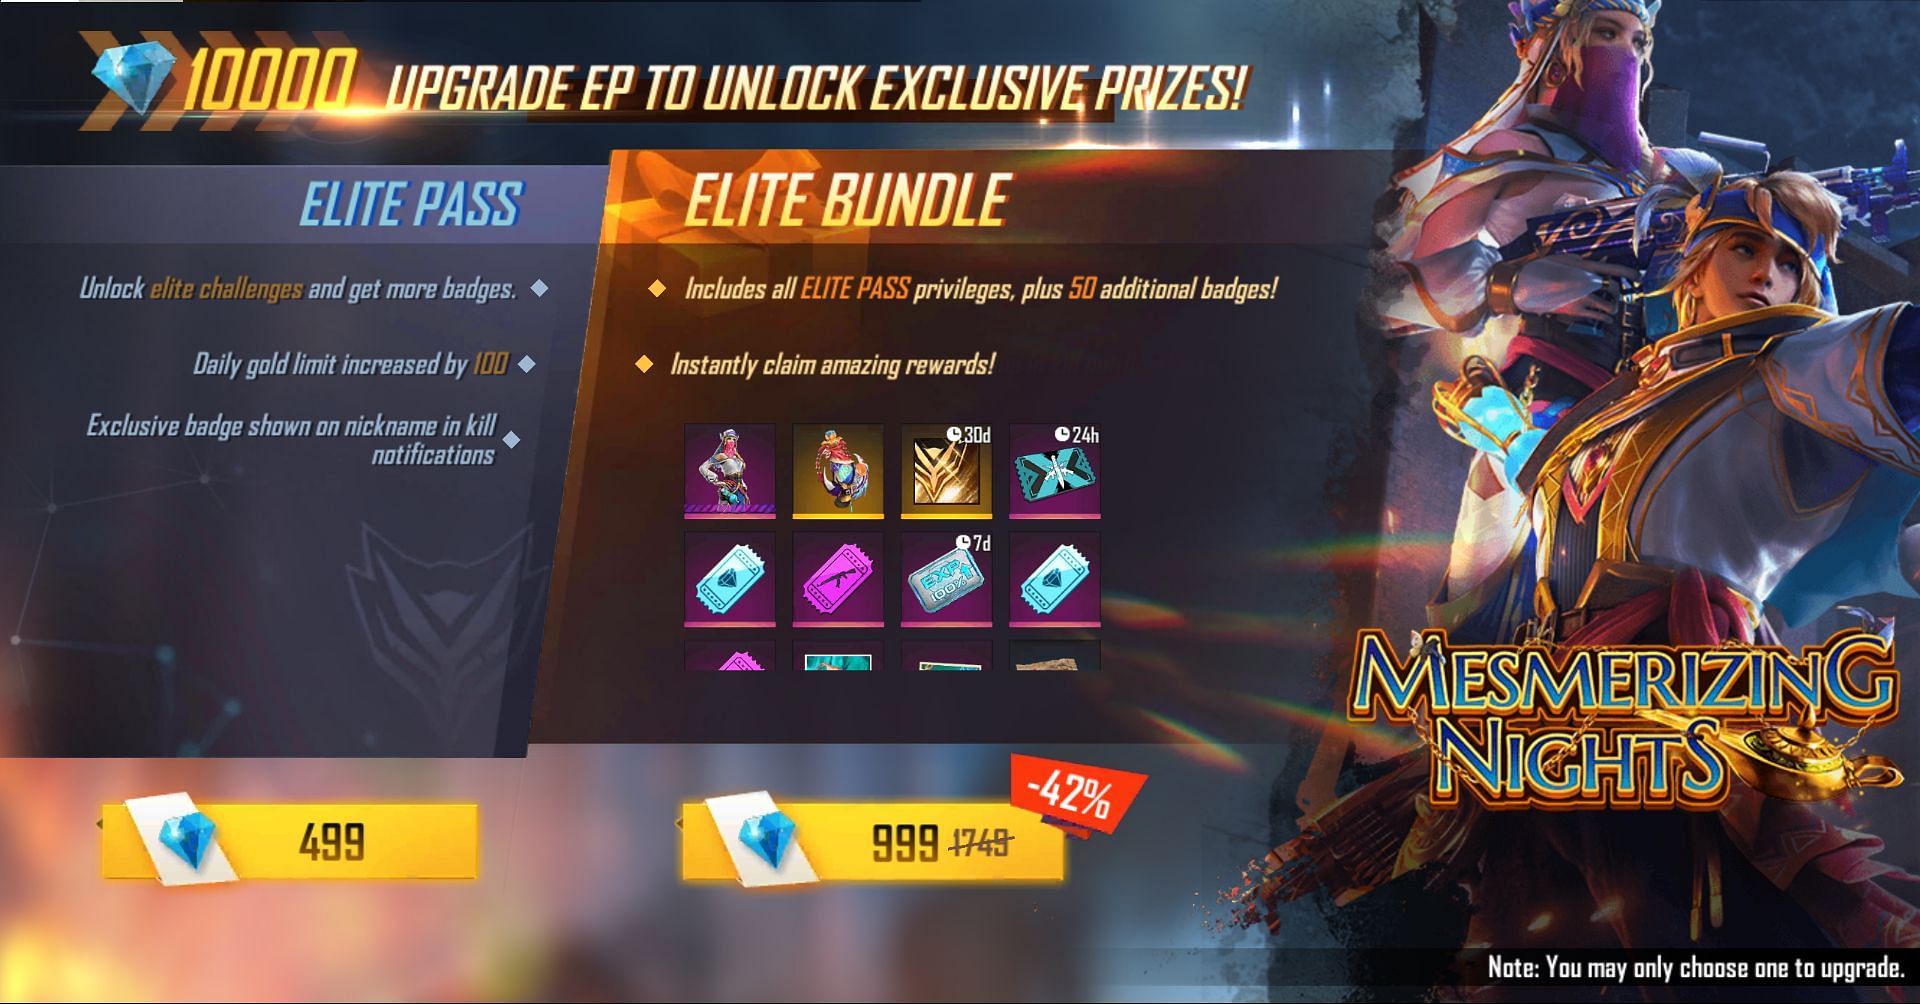 Tons of rewards are offered in the Elite Pass (Image via Free Fire)